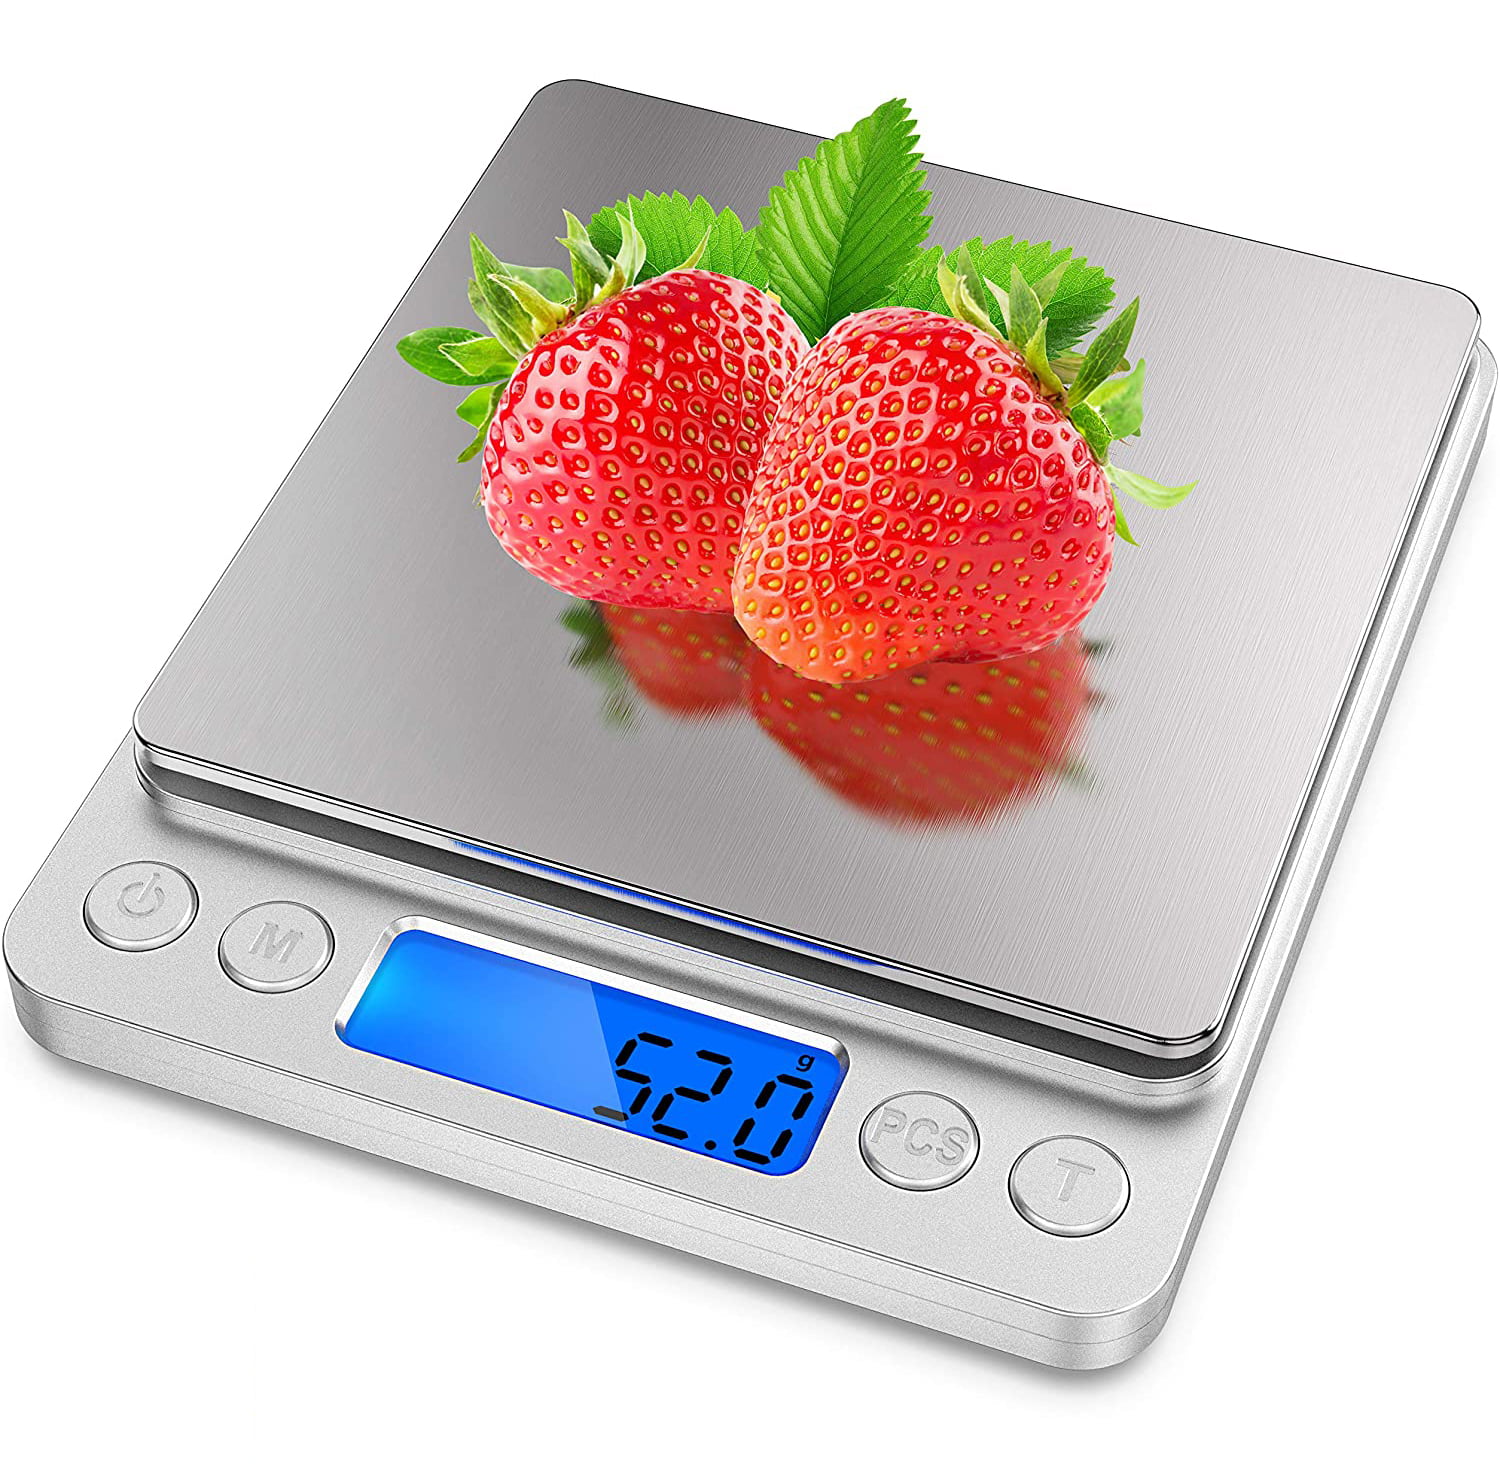 22 lb Multifunction Digital Kitchen Scale Weight Grams and Oz for Home Baking and Cooking Color Gold 